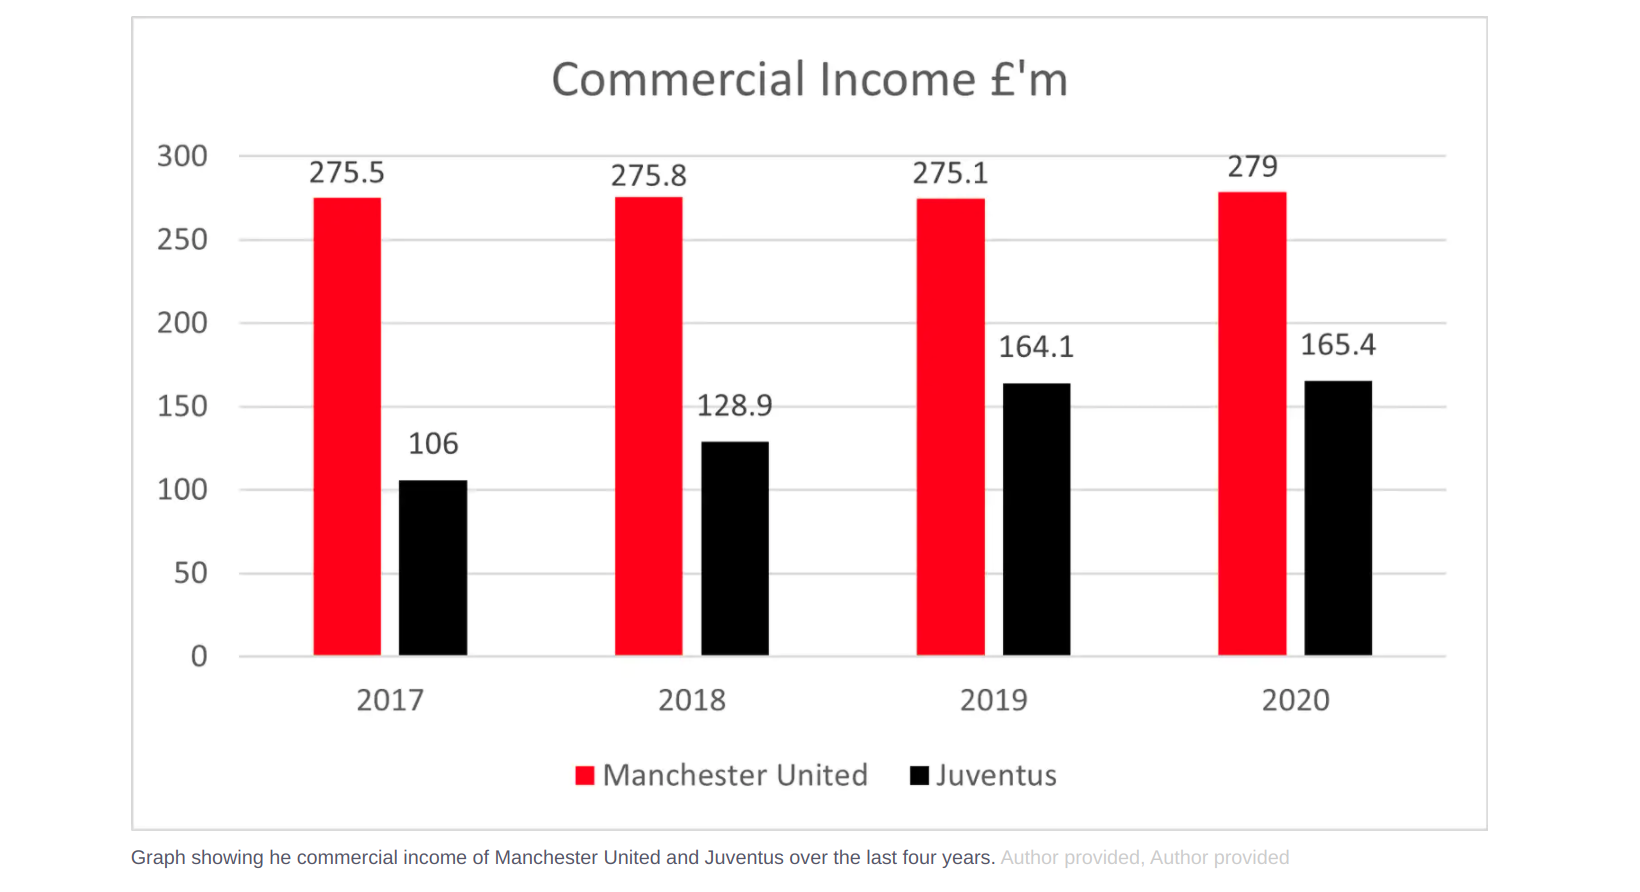 Graph showing he commercial income of Manchester United and Juventus over the last four years